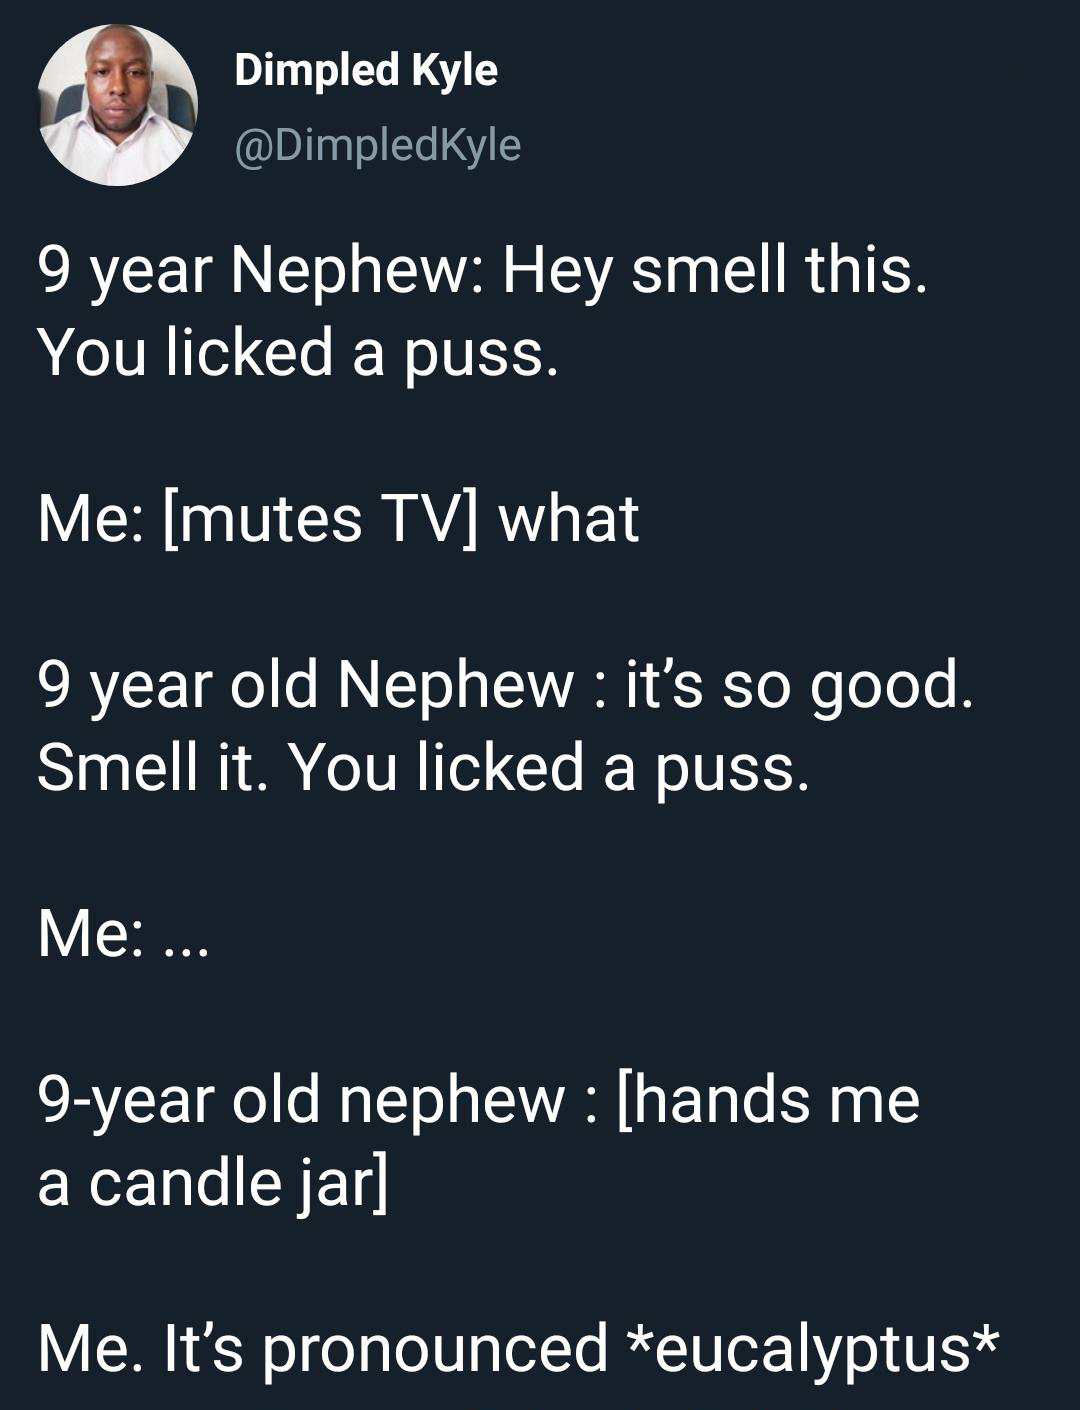 material - Dimpled Kyle 9 year Nephew Hey smell this. You licked a puss. Me mutes Tv what 9 year old Nephew it's so good. Smell it. You licked a puss. Me ... 9year old nephew hands me a candle jar Me. It's pronounced eucalyptus